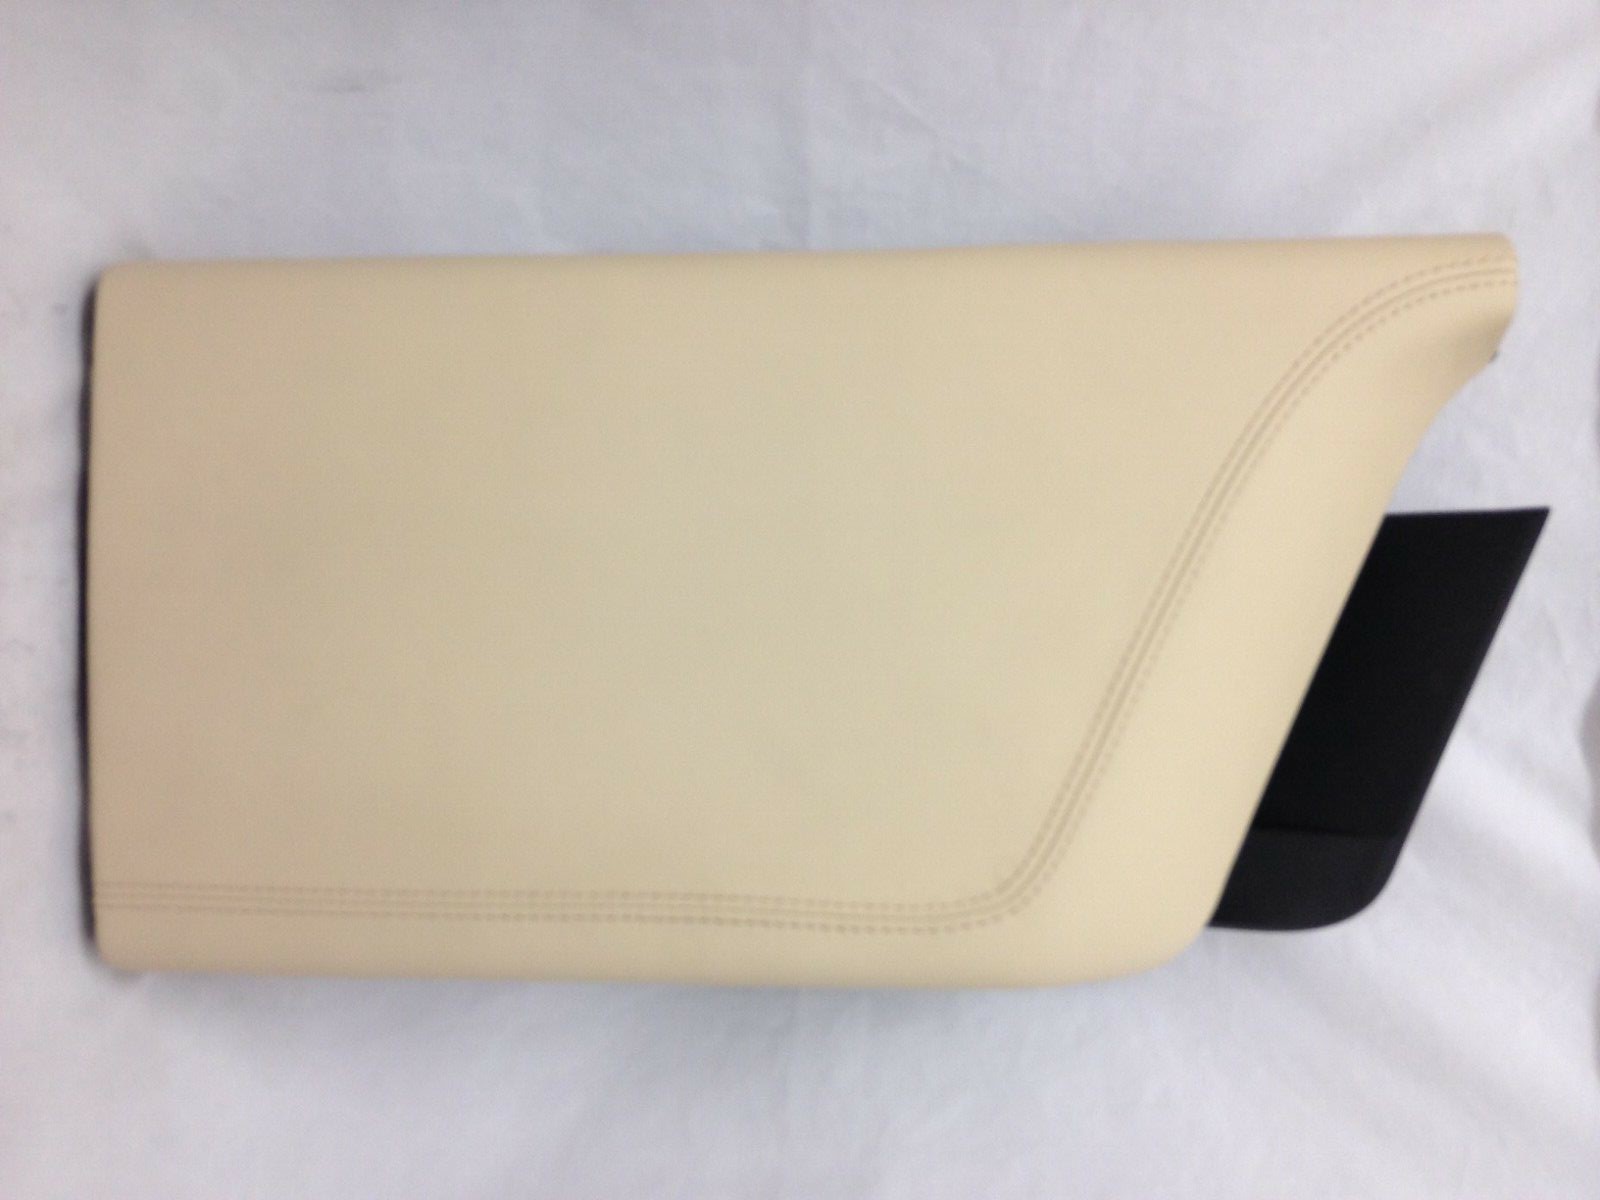 Cadillac CT6 2016+ center console leather lid +bin Cashmere NEW